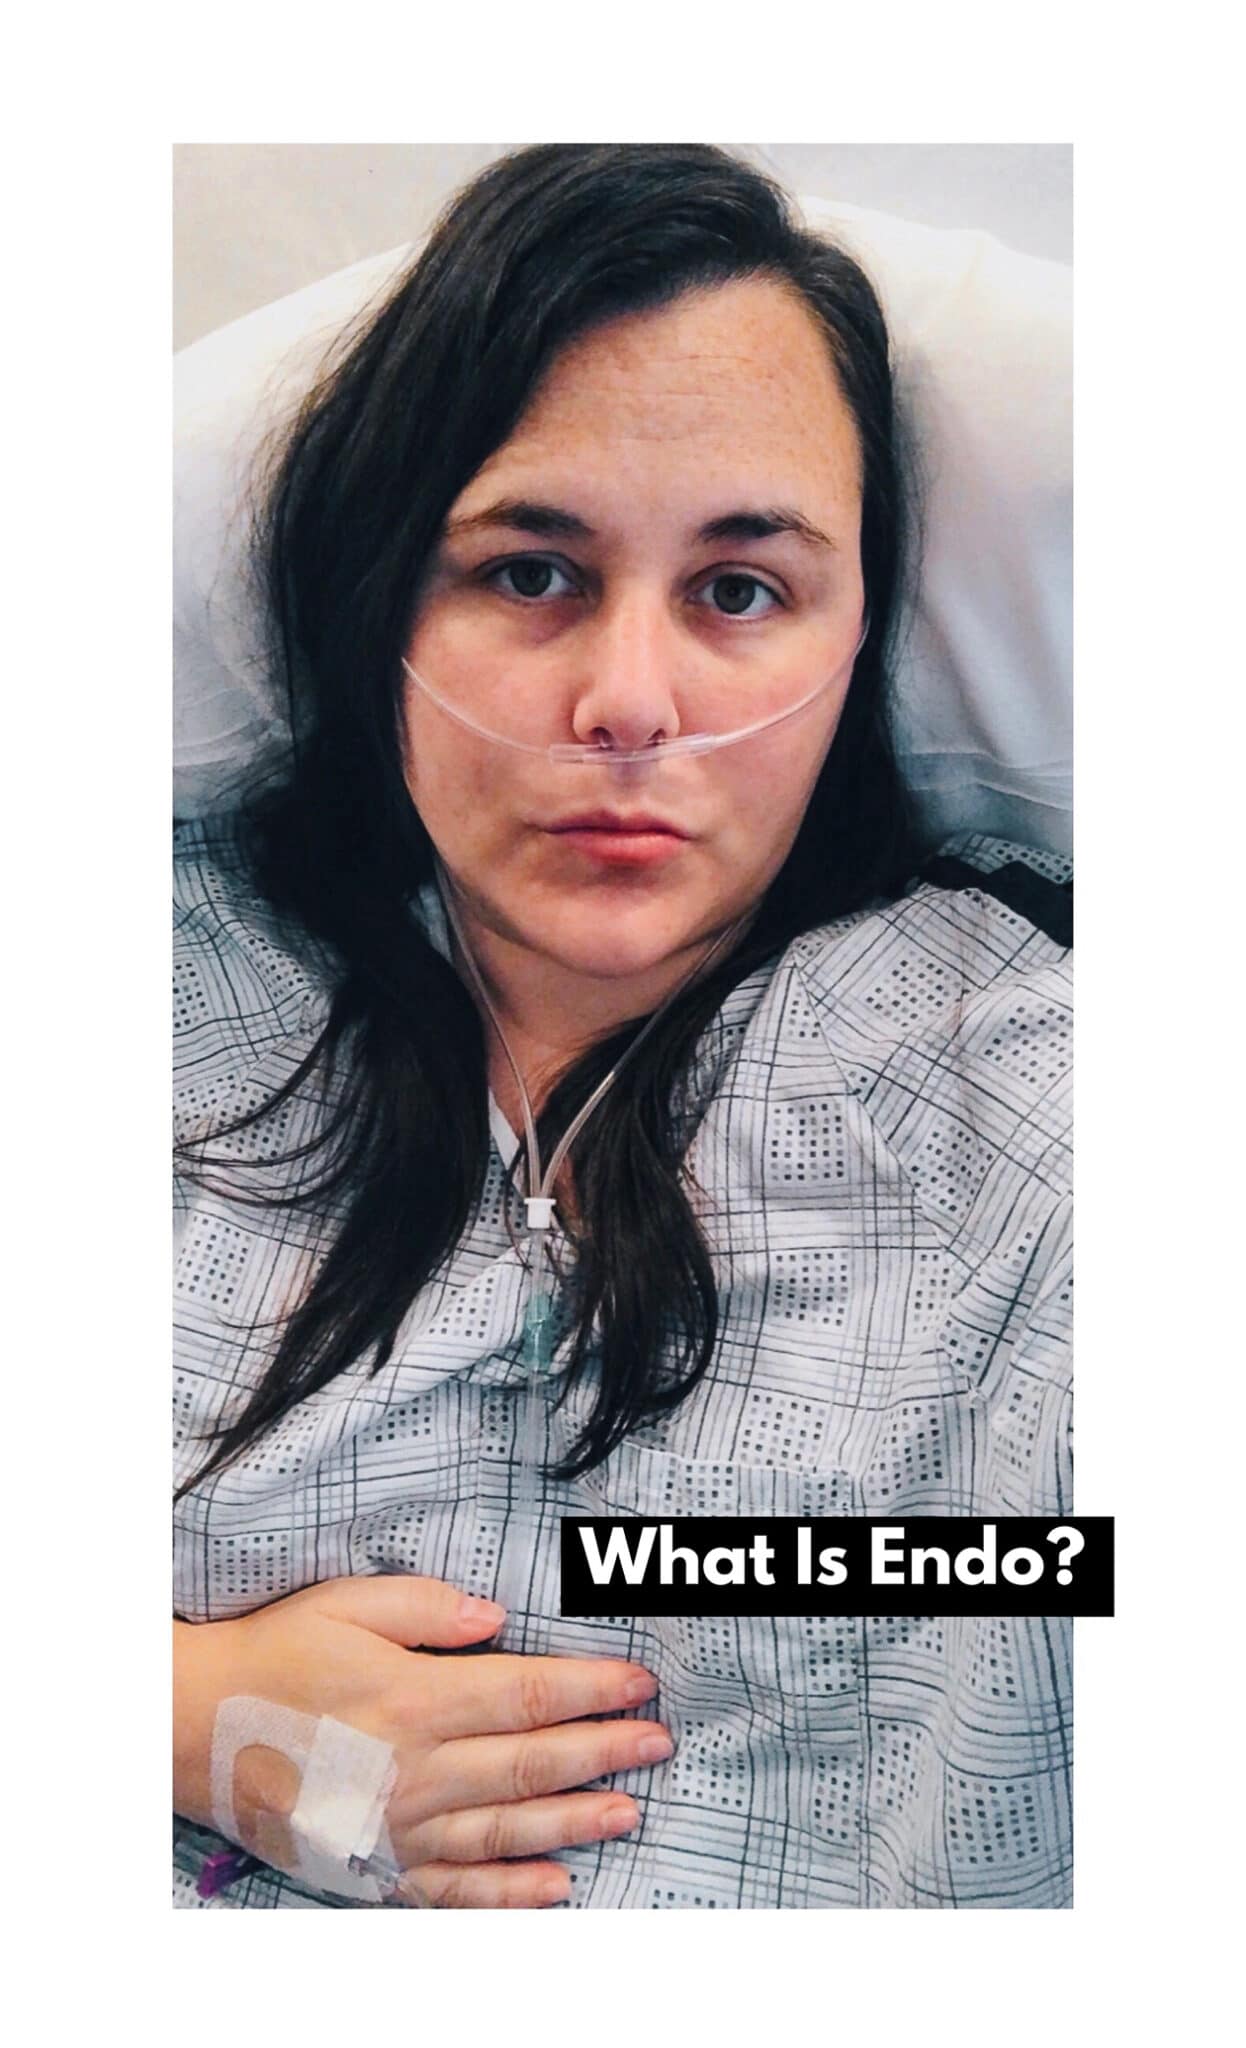 WHAT IS ENDO?